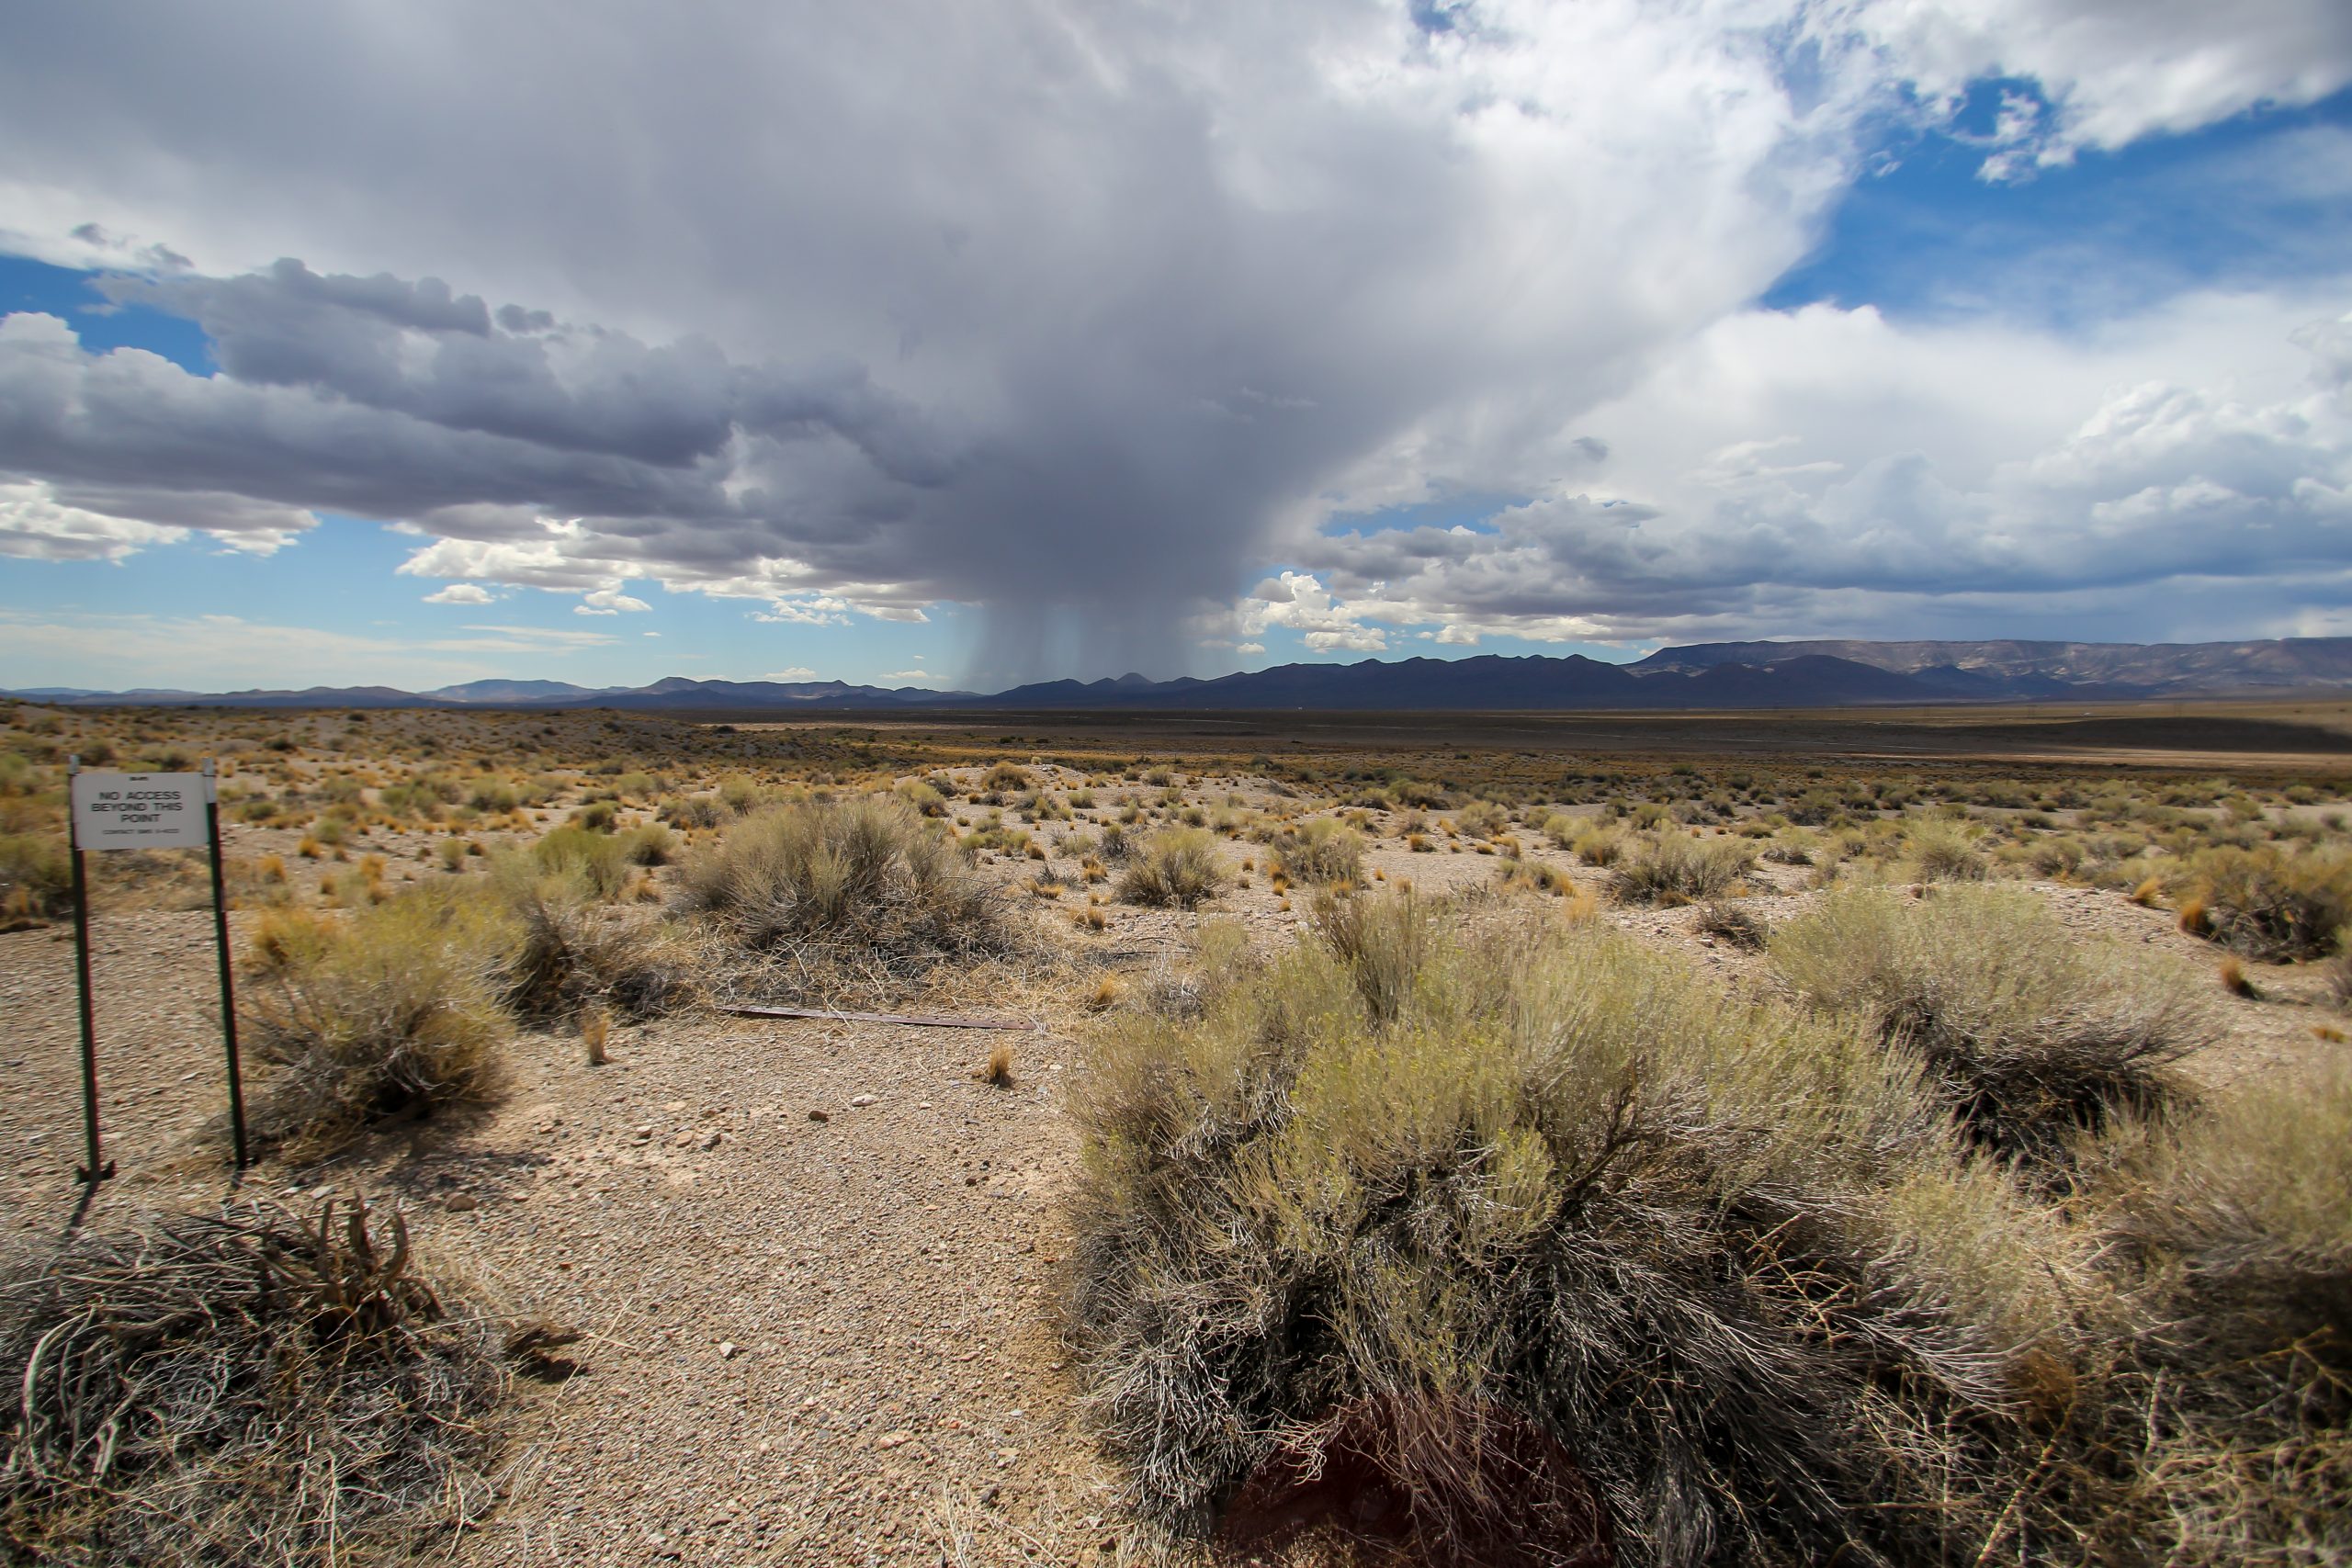 landscape image of desert with rain clouds and mountains in background